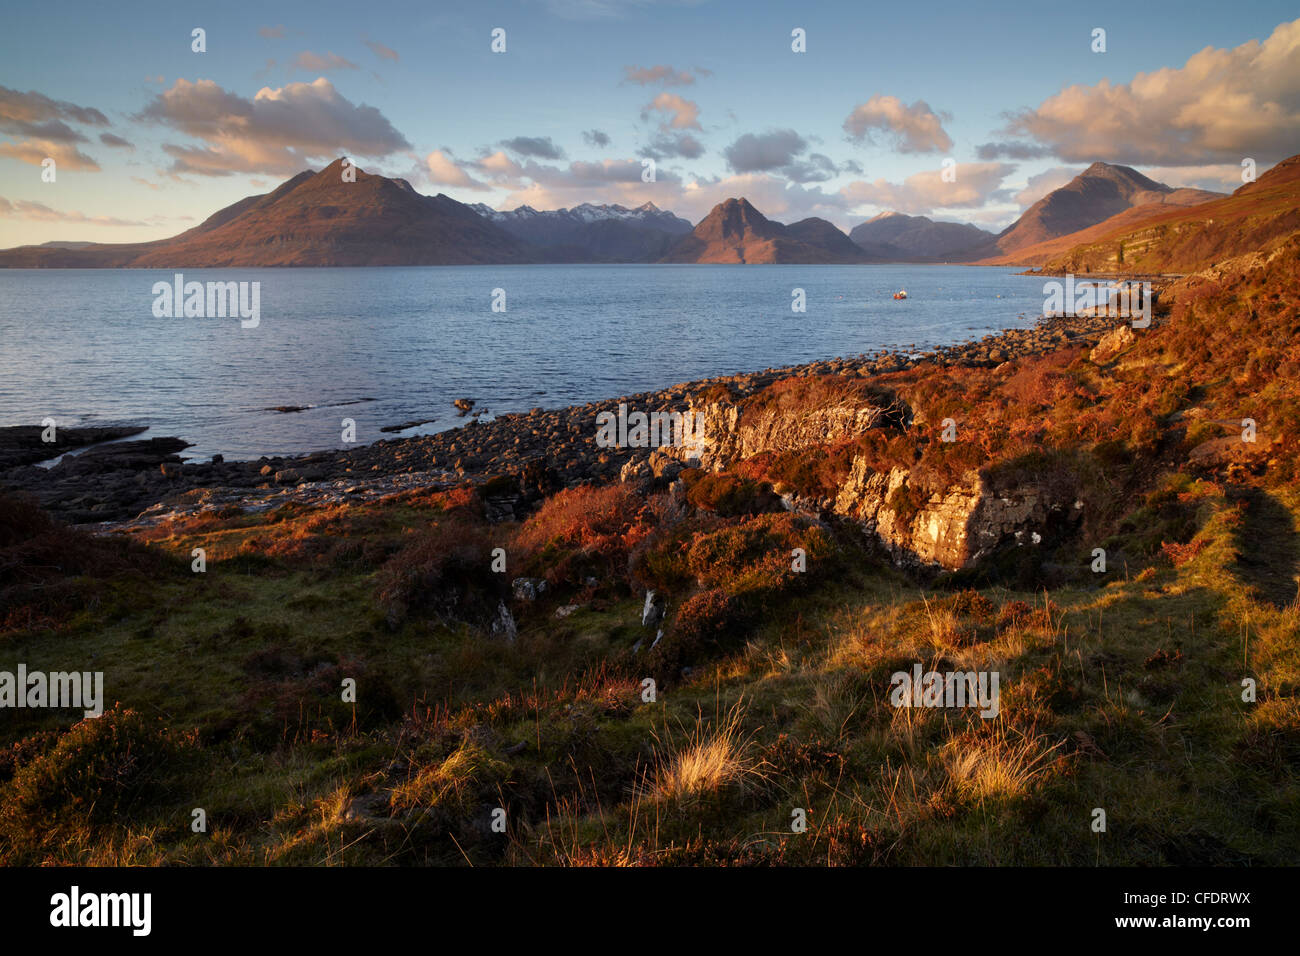 A November afternoon on the Isle of Skye at Elgol looking across Loch Scavaig towards the Cuillin Mountains, Scotland, UK Stock Photo